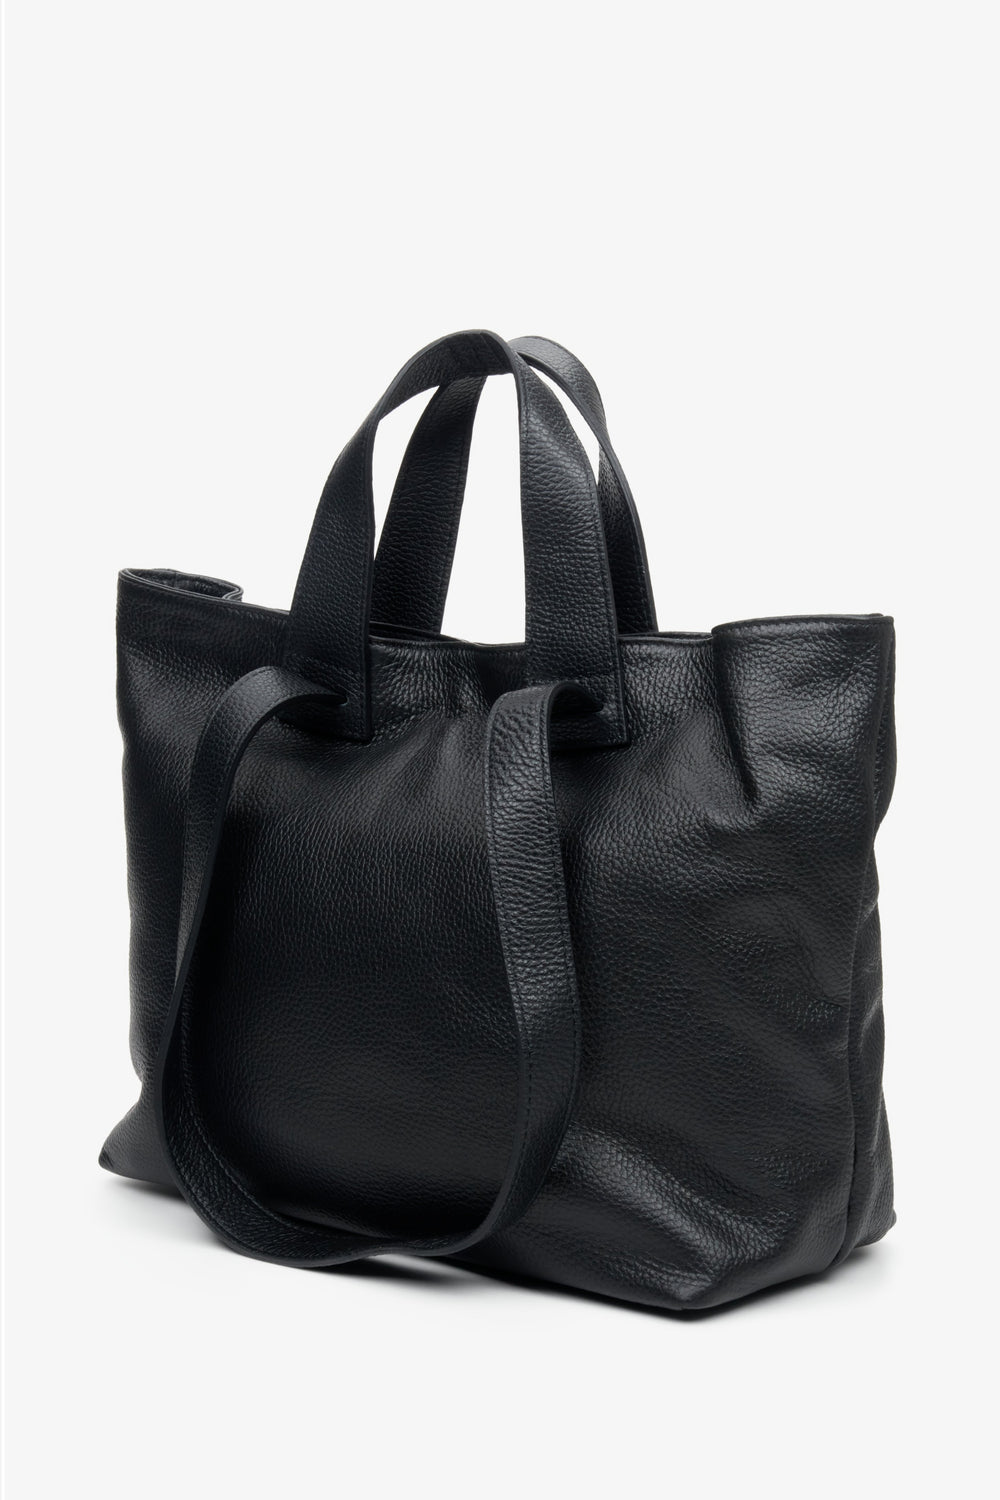 Black large women's handbag made from genuine leather by Estro.